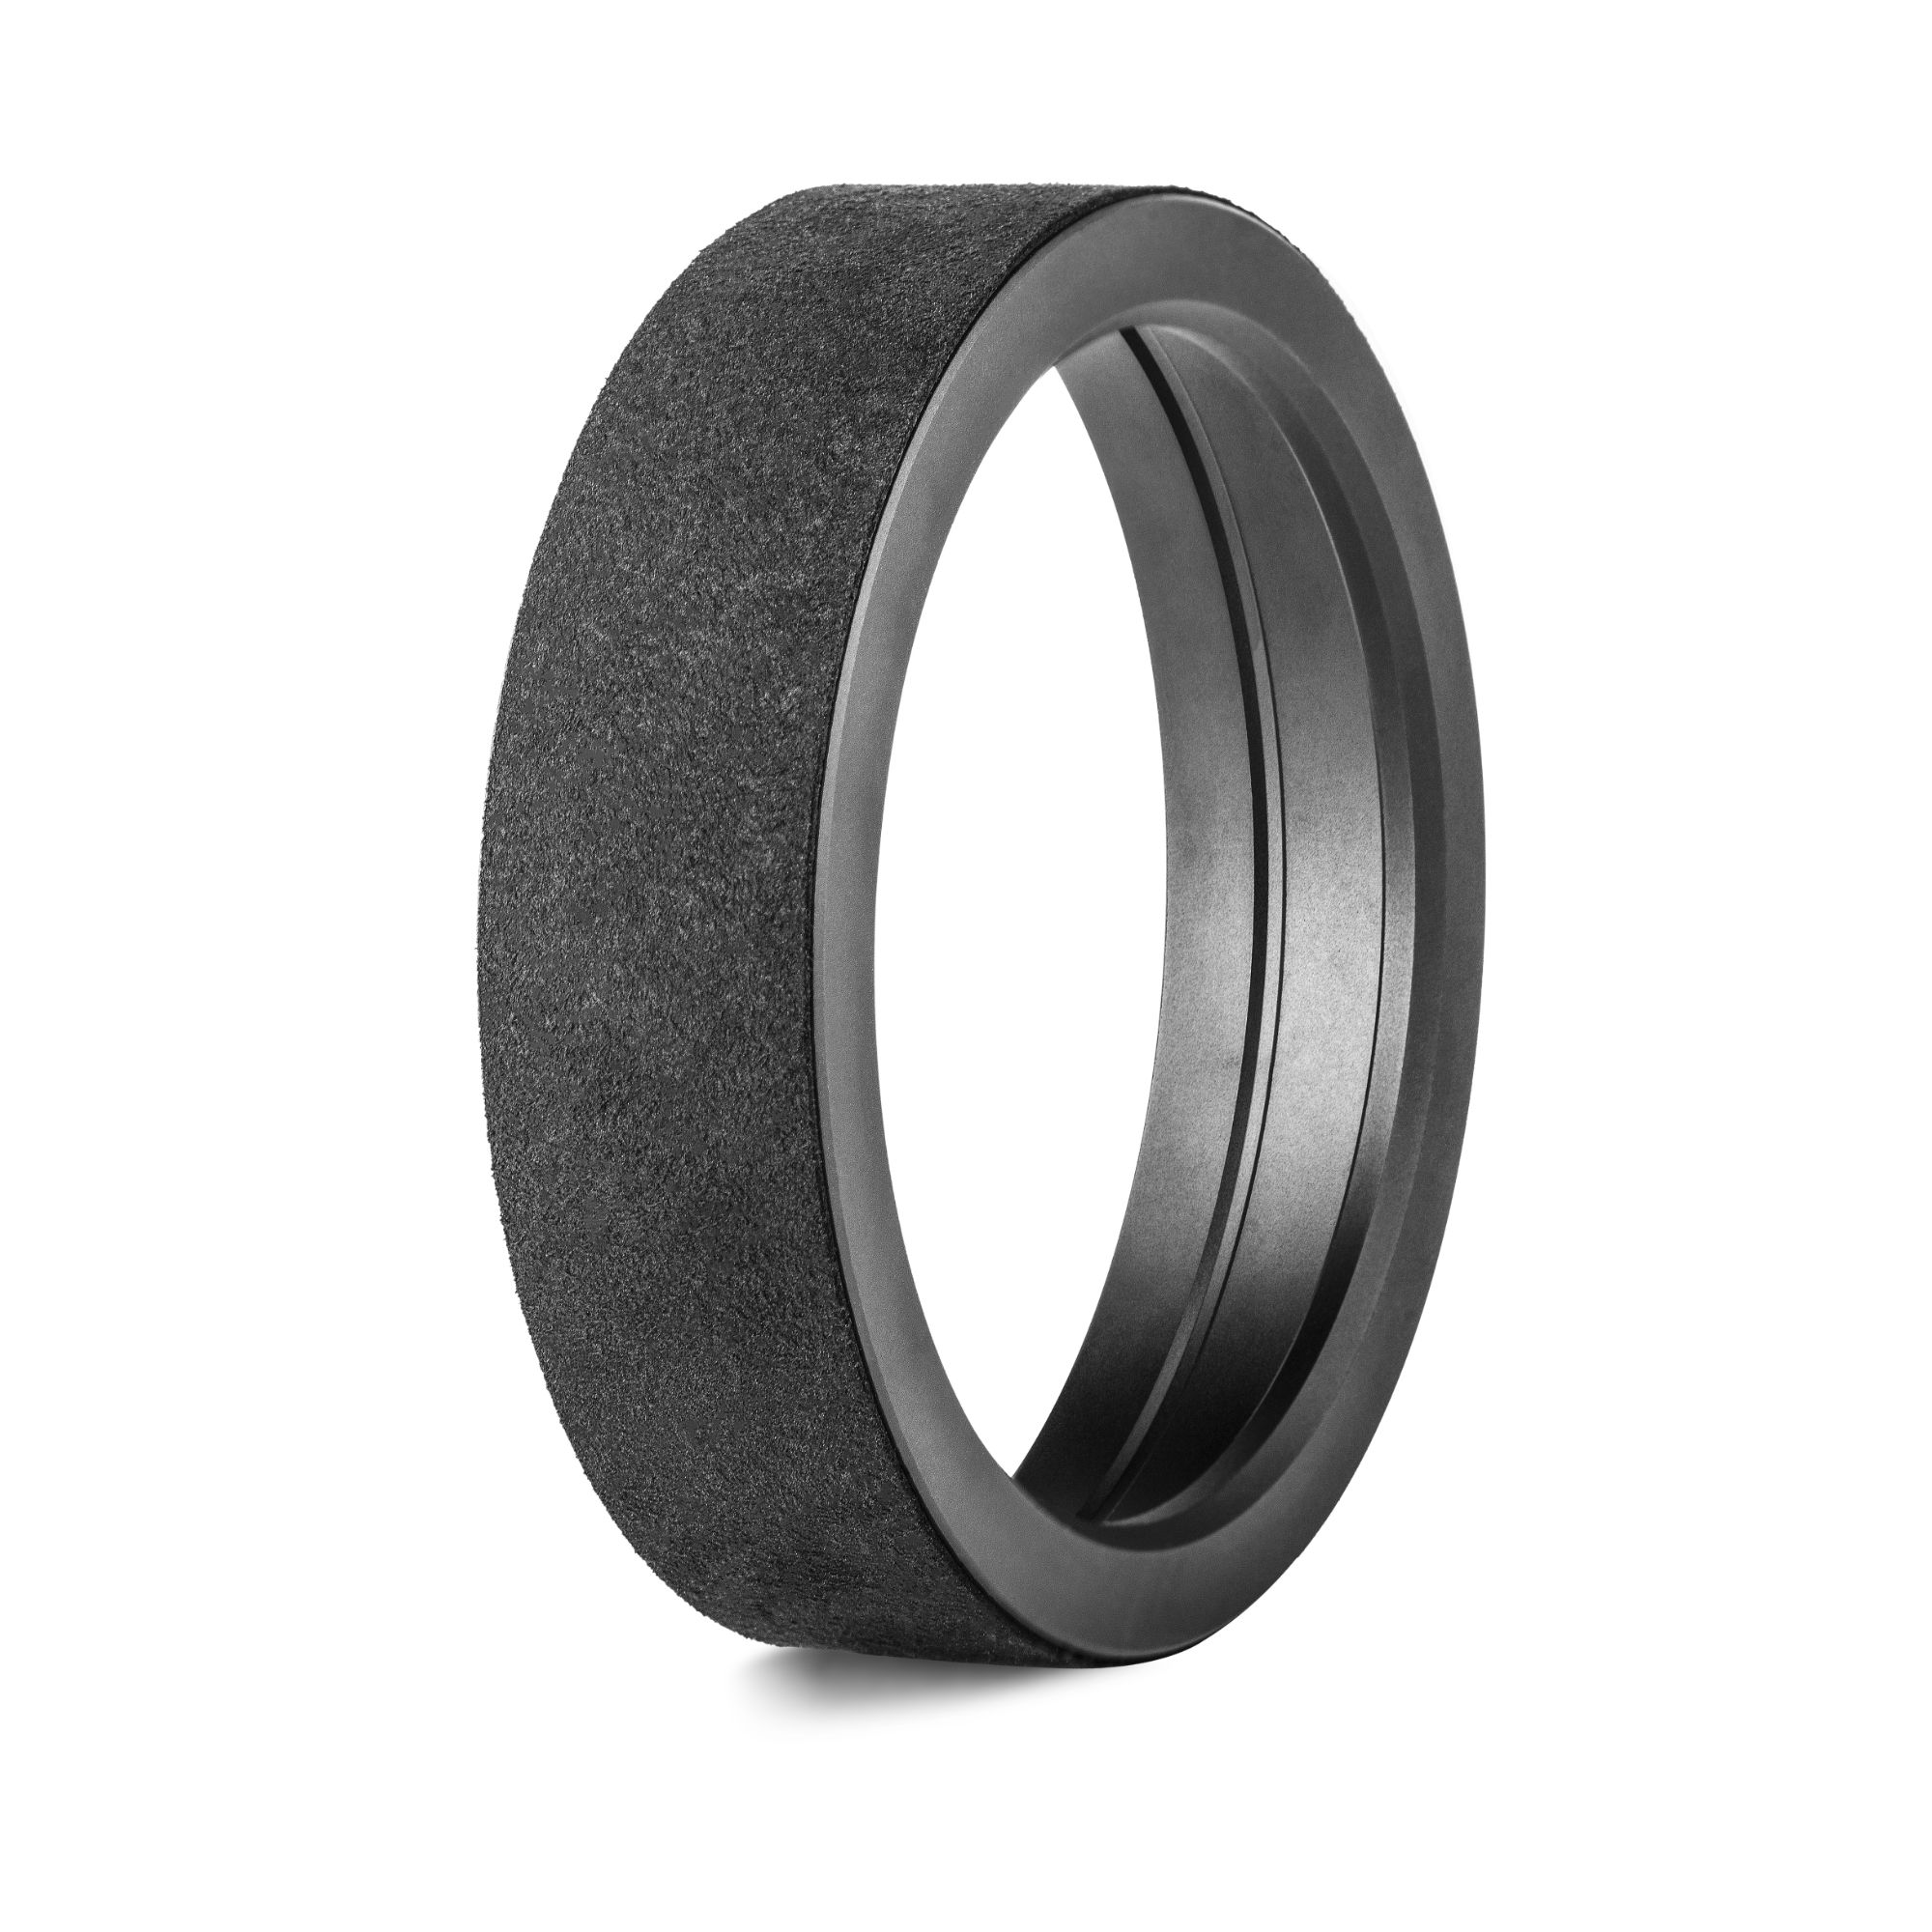 NiSi-77mm-Filter-Adapter-Ring-for-S5-Nikon-14-24mm-and-Tamron-15-30.jpg